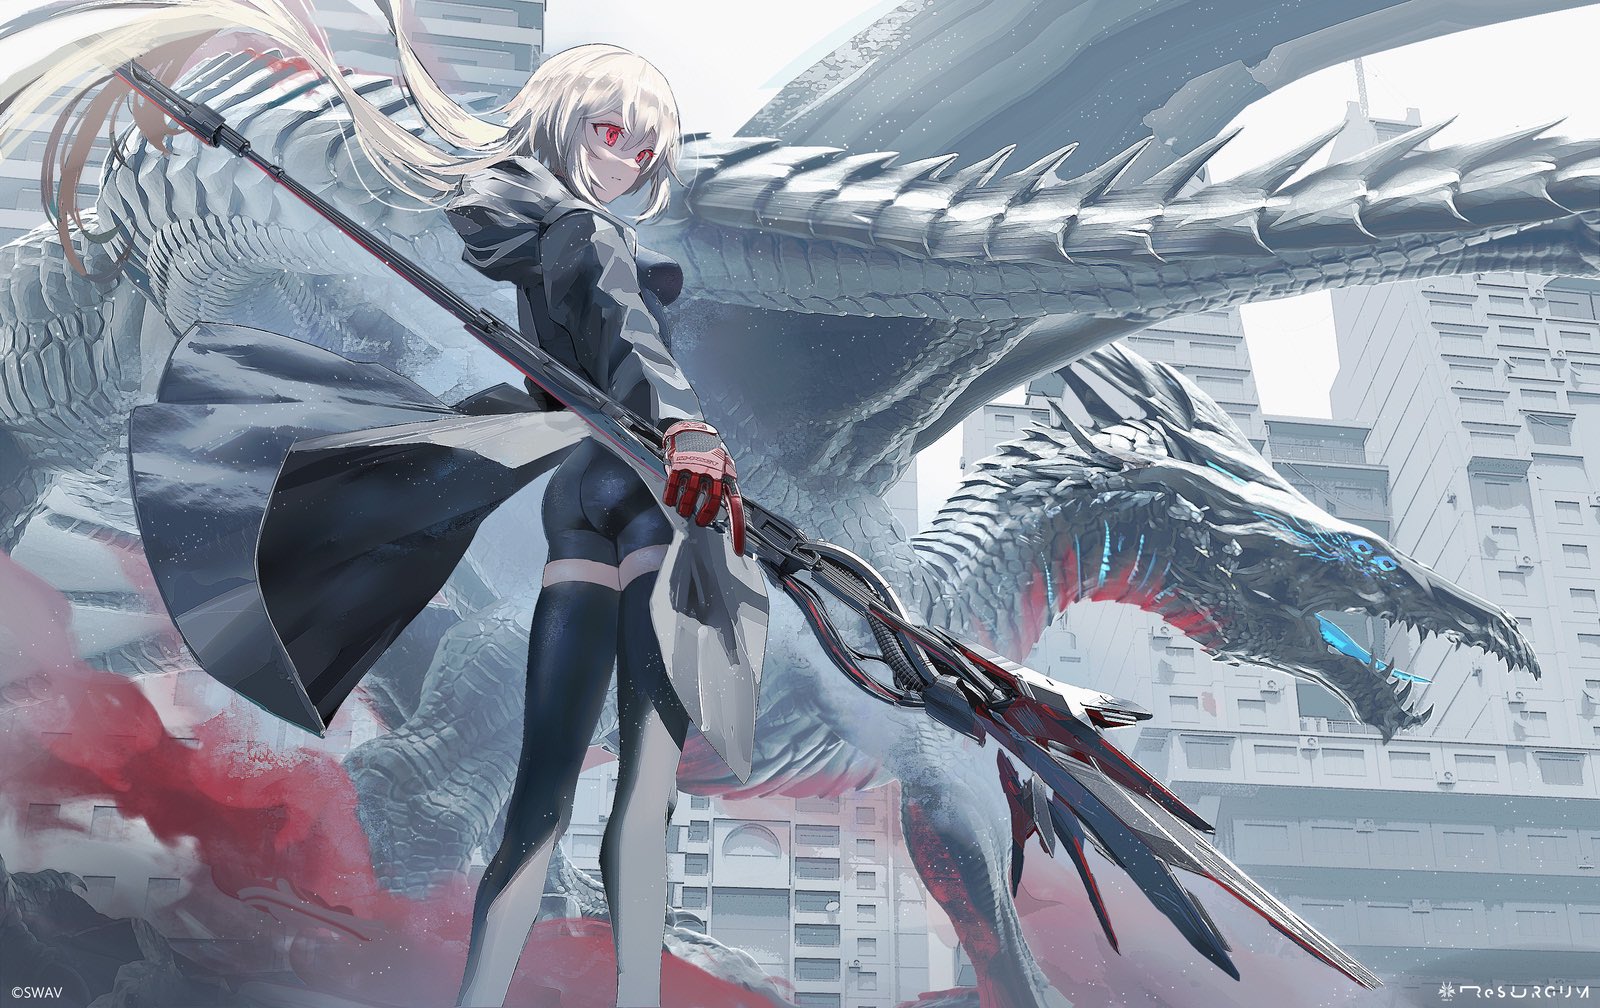 Anime 1600x1008 dragon SWAV anime girls lance weapon creature white hair red eyes standing stockings looking away building cape gloves long hair watermarked hair blowing in the wind